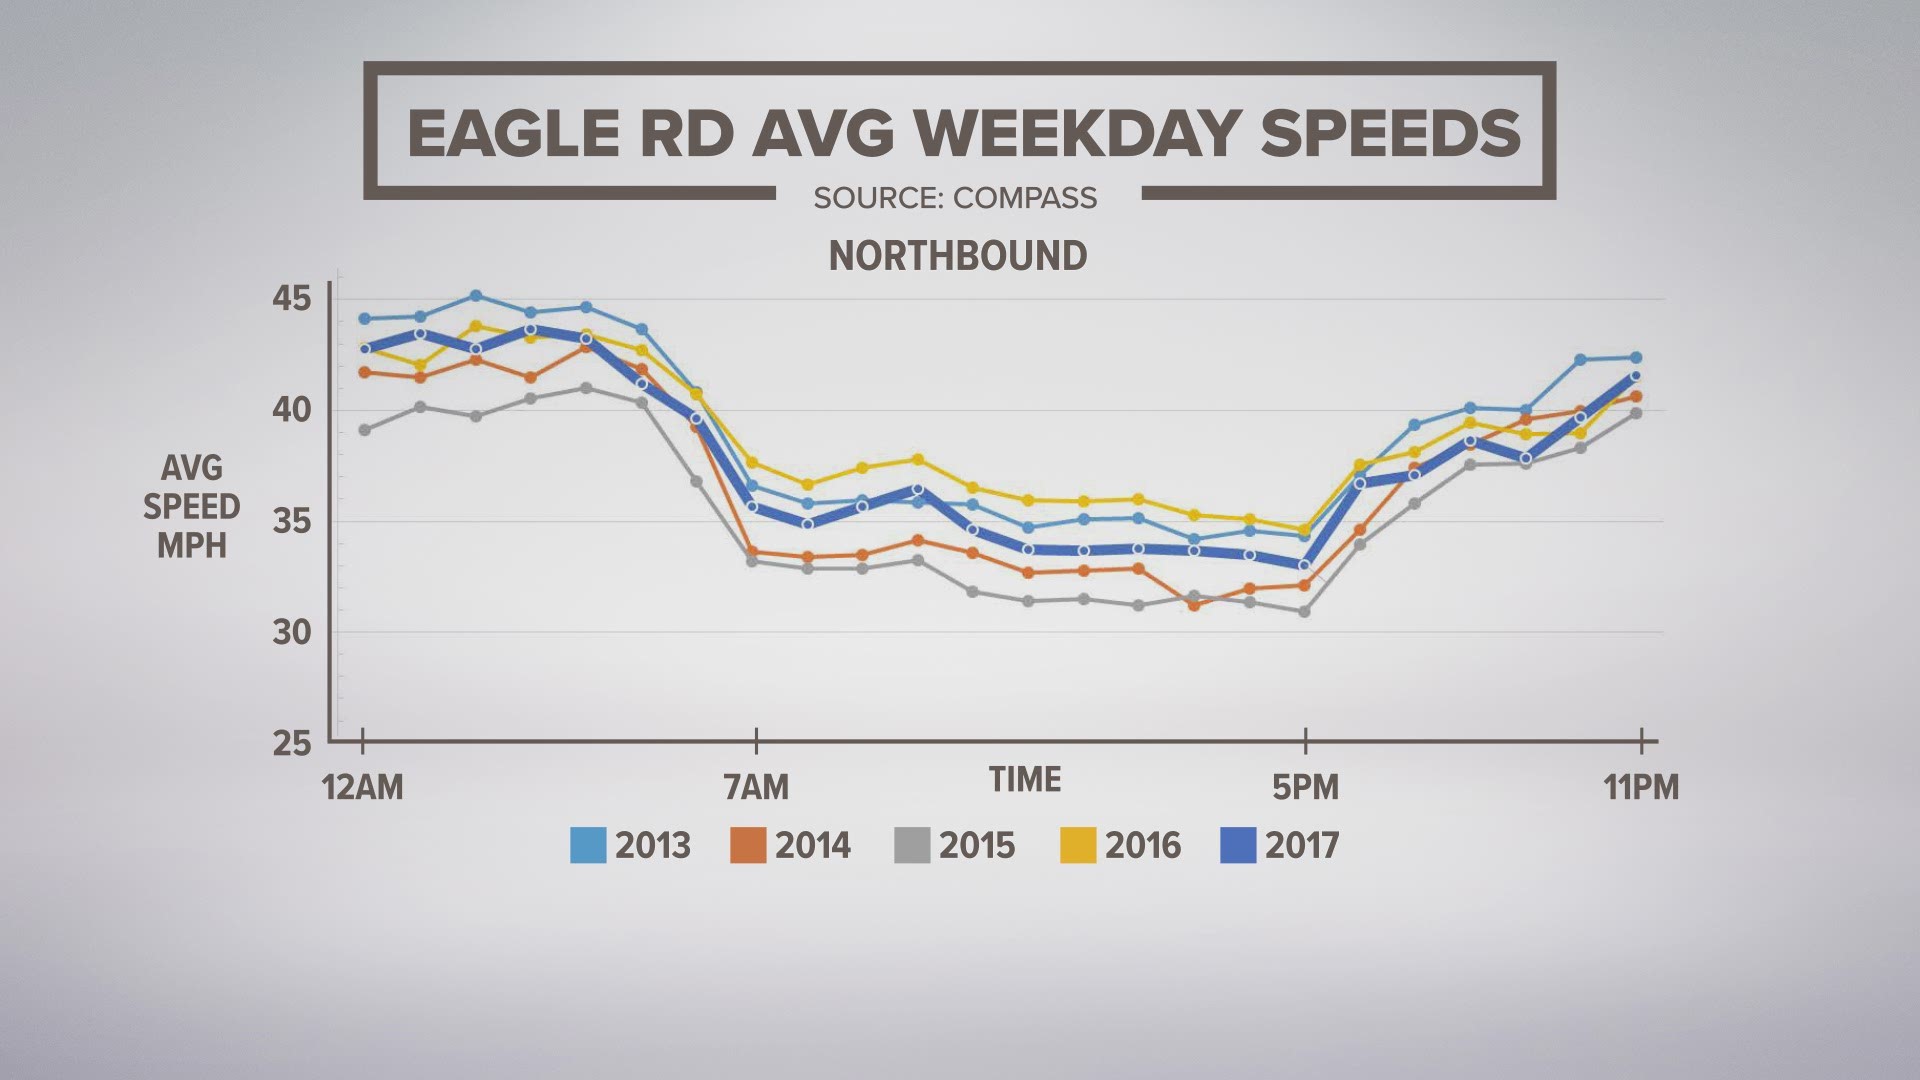 See when traffic is moving the slowest on Eagle Road with data from COMPASS on the average weekday speeds on Eagle Road.